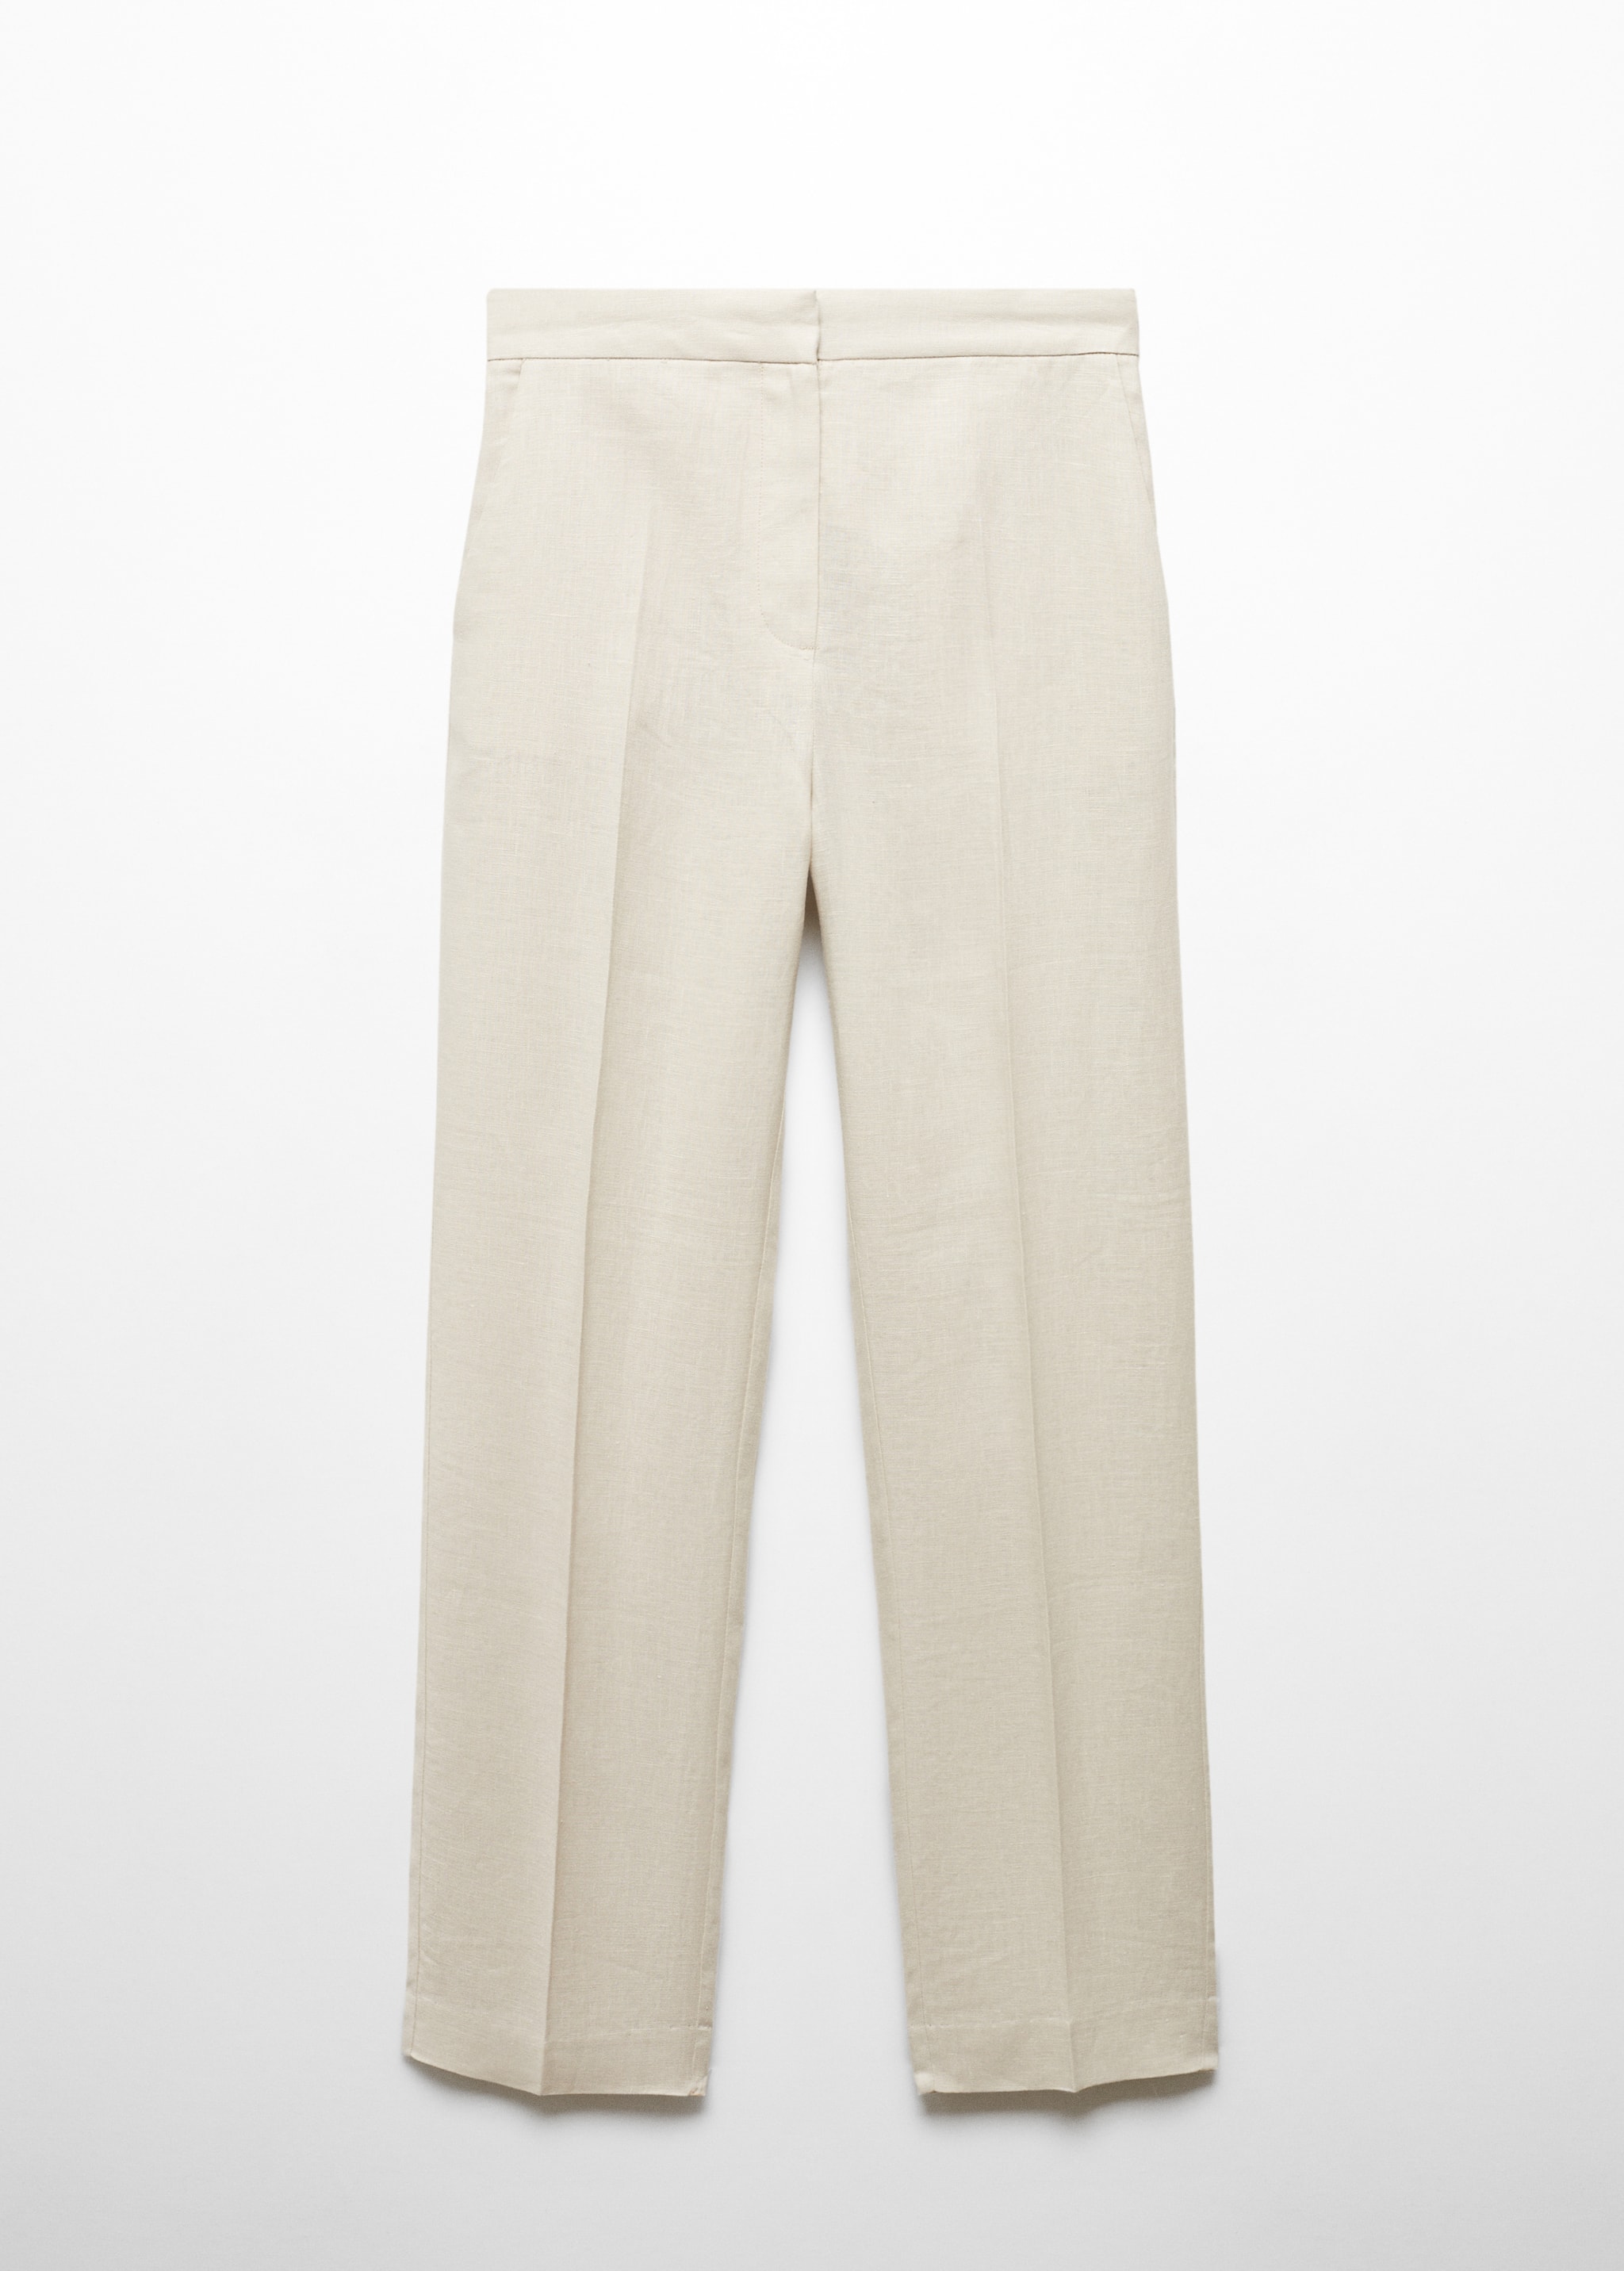 100% linen straight trousers - Article without model